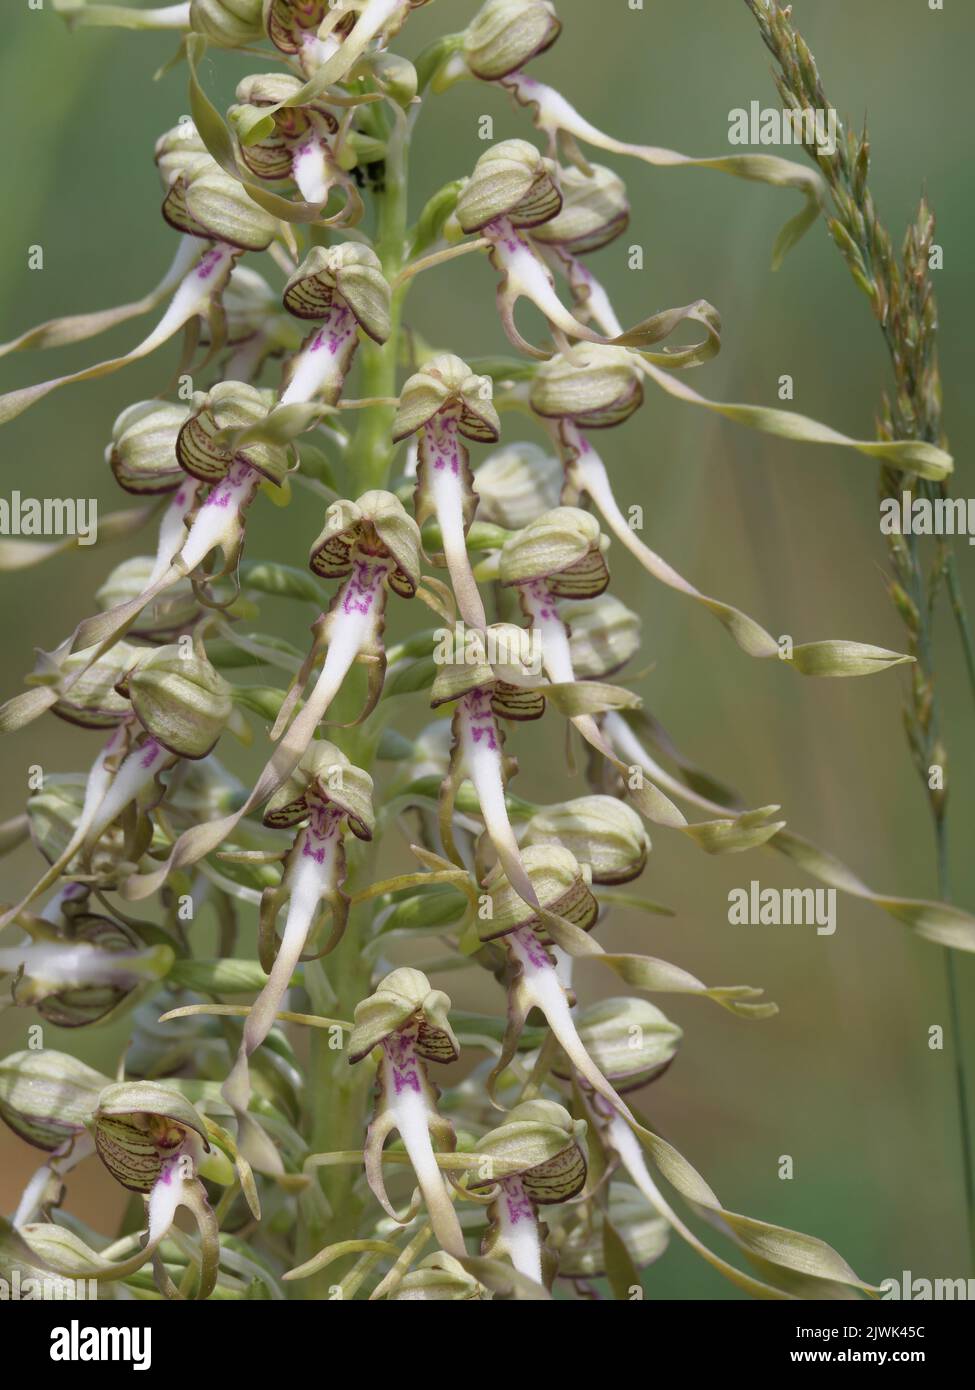 The gigantic blossoms and inflorescences of the goat's belt tongue, Himantoglossum hircinum, on a dry grassland near Würzburg Stock Photo